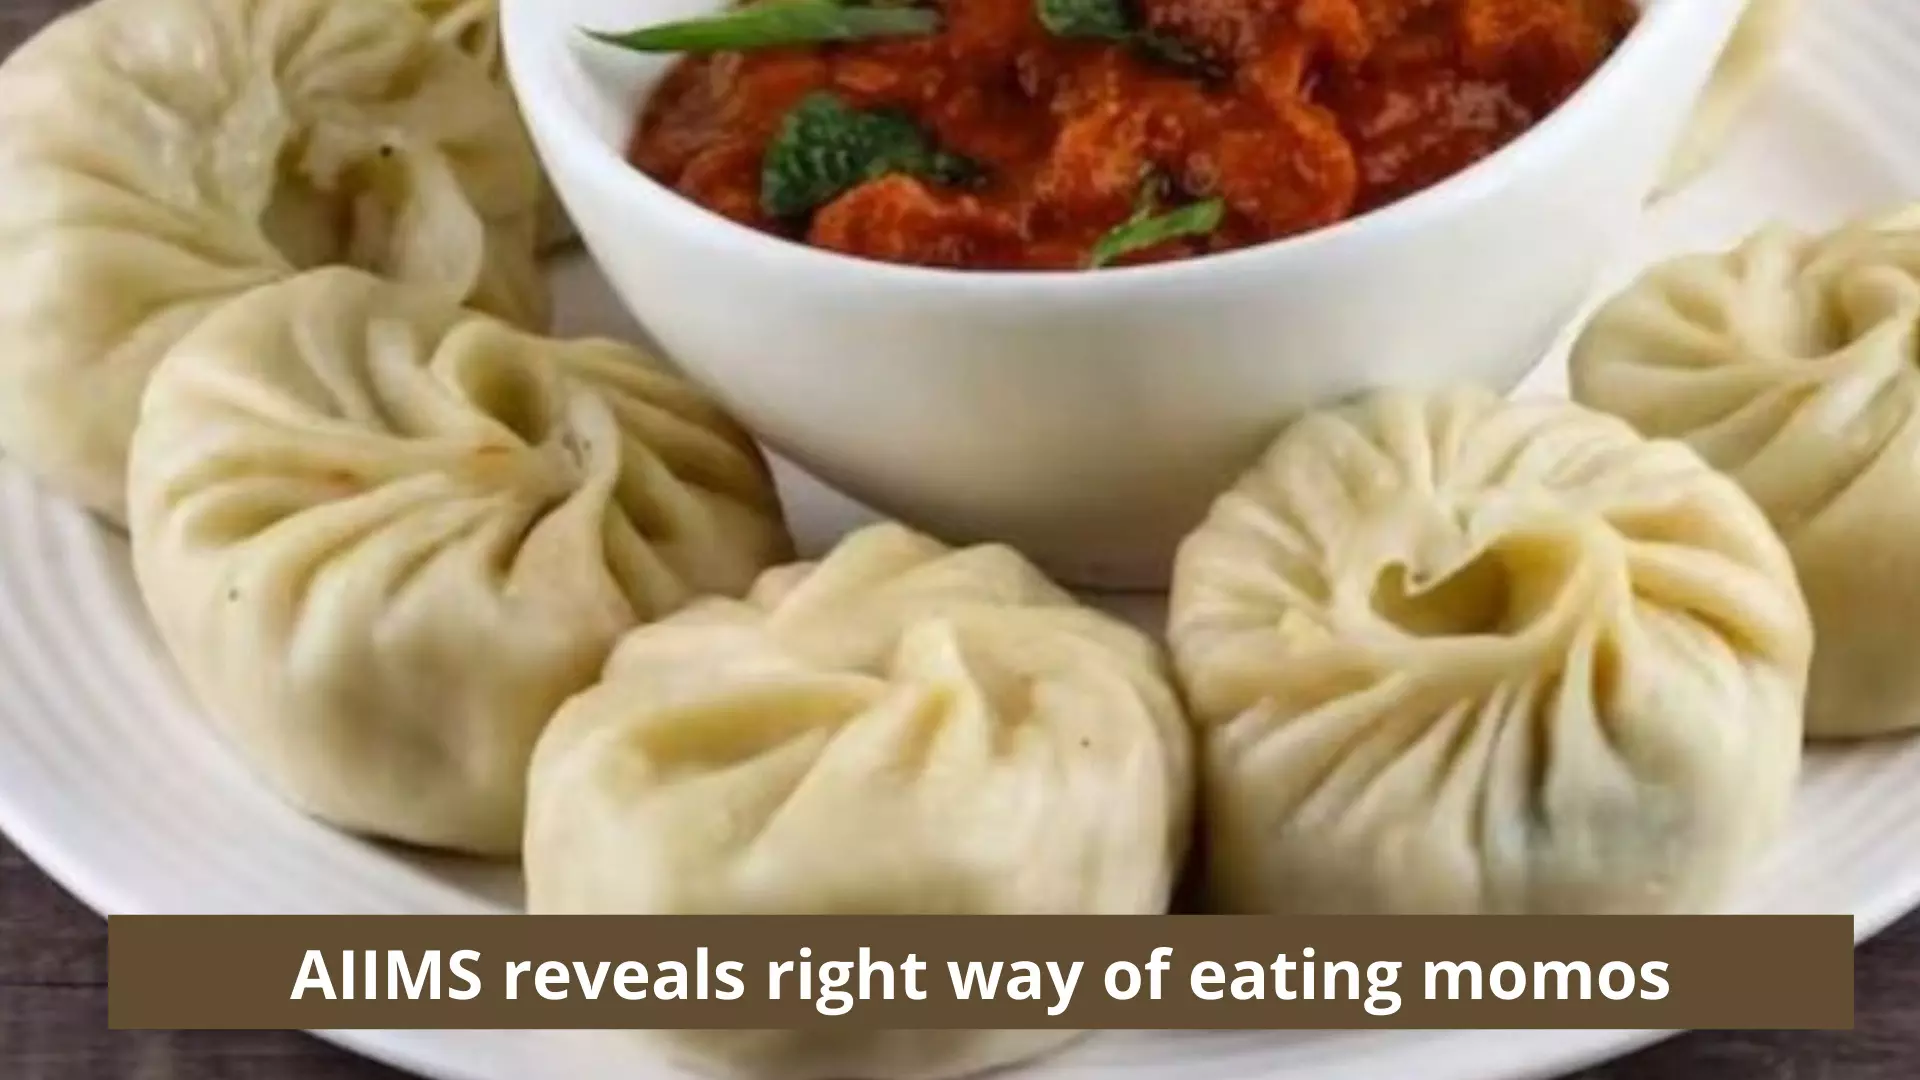 AIIMS reveals right way of eating momos